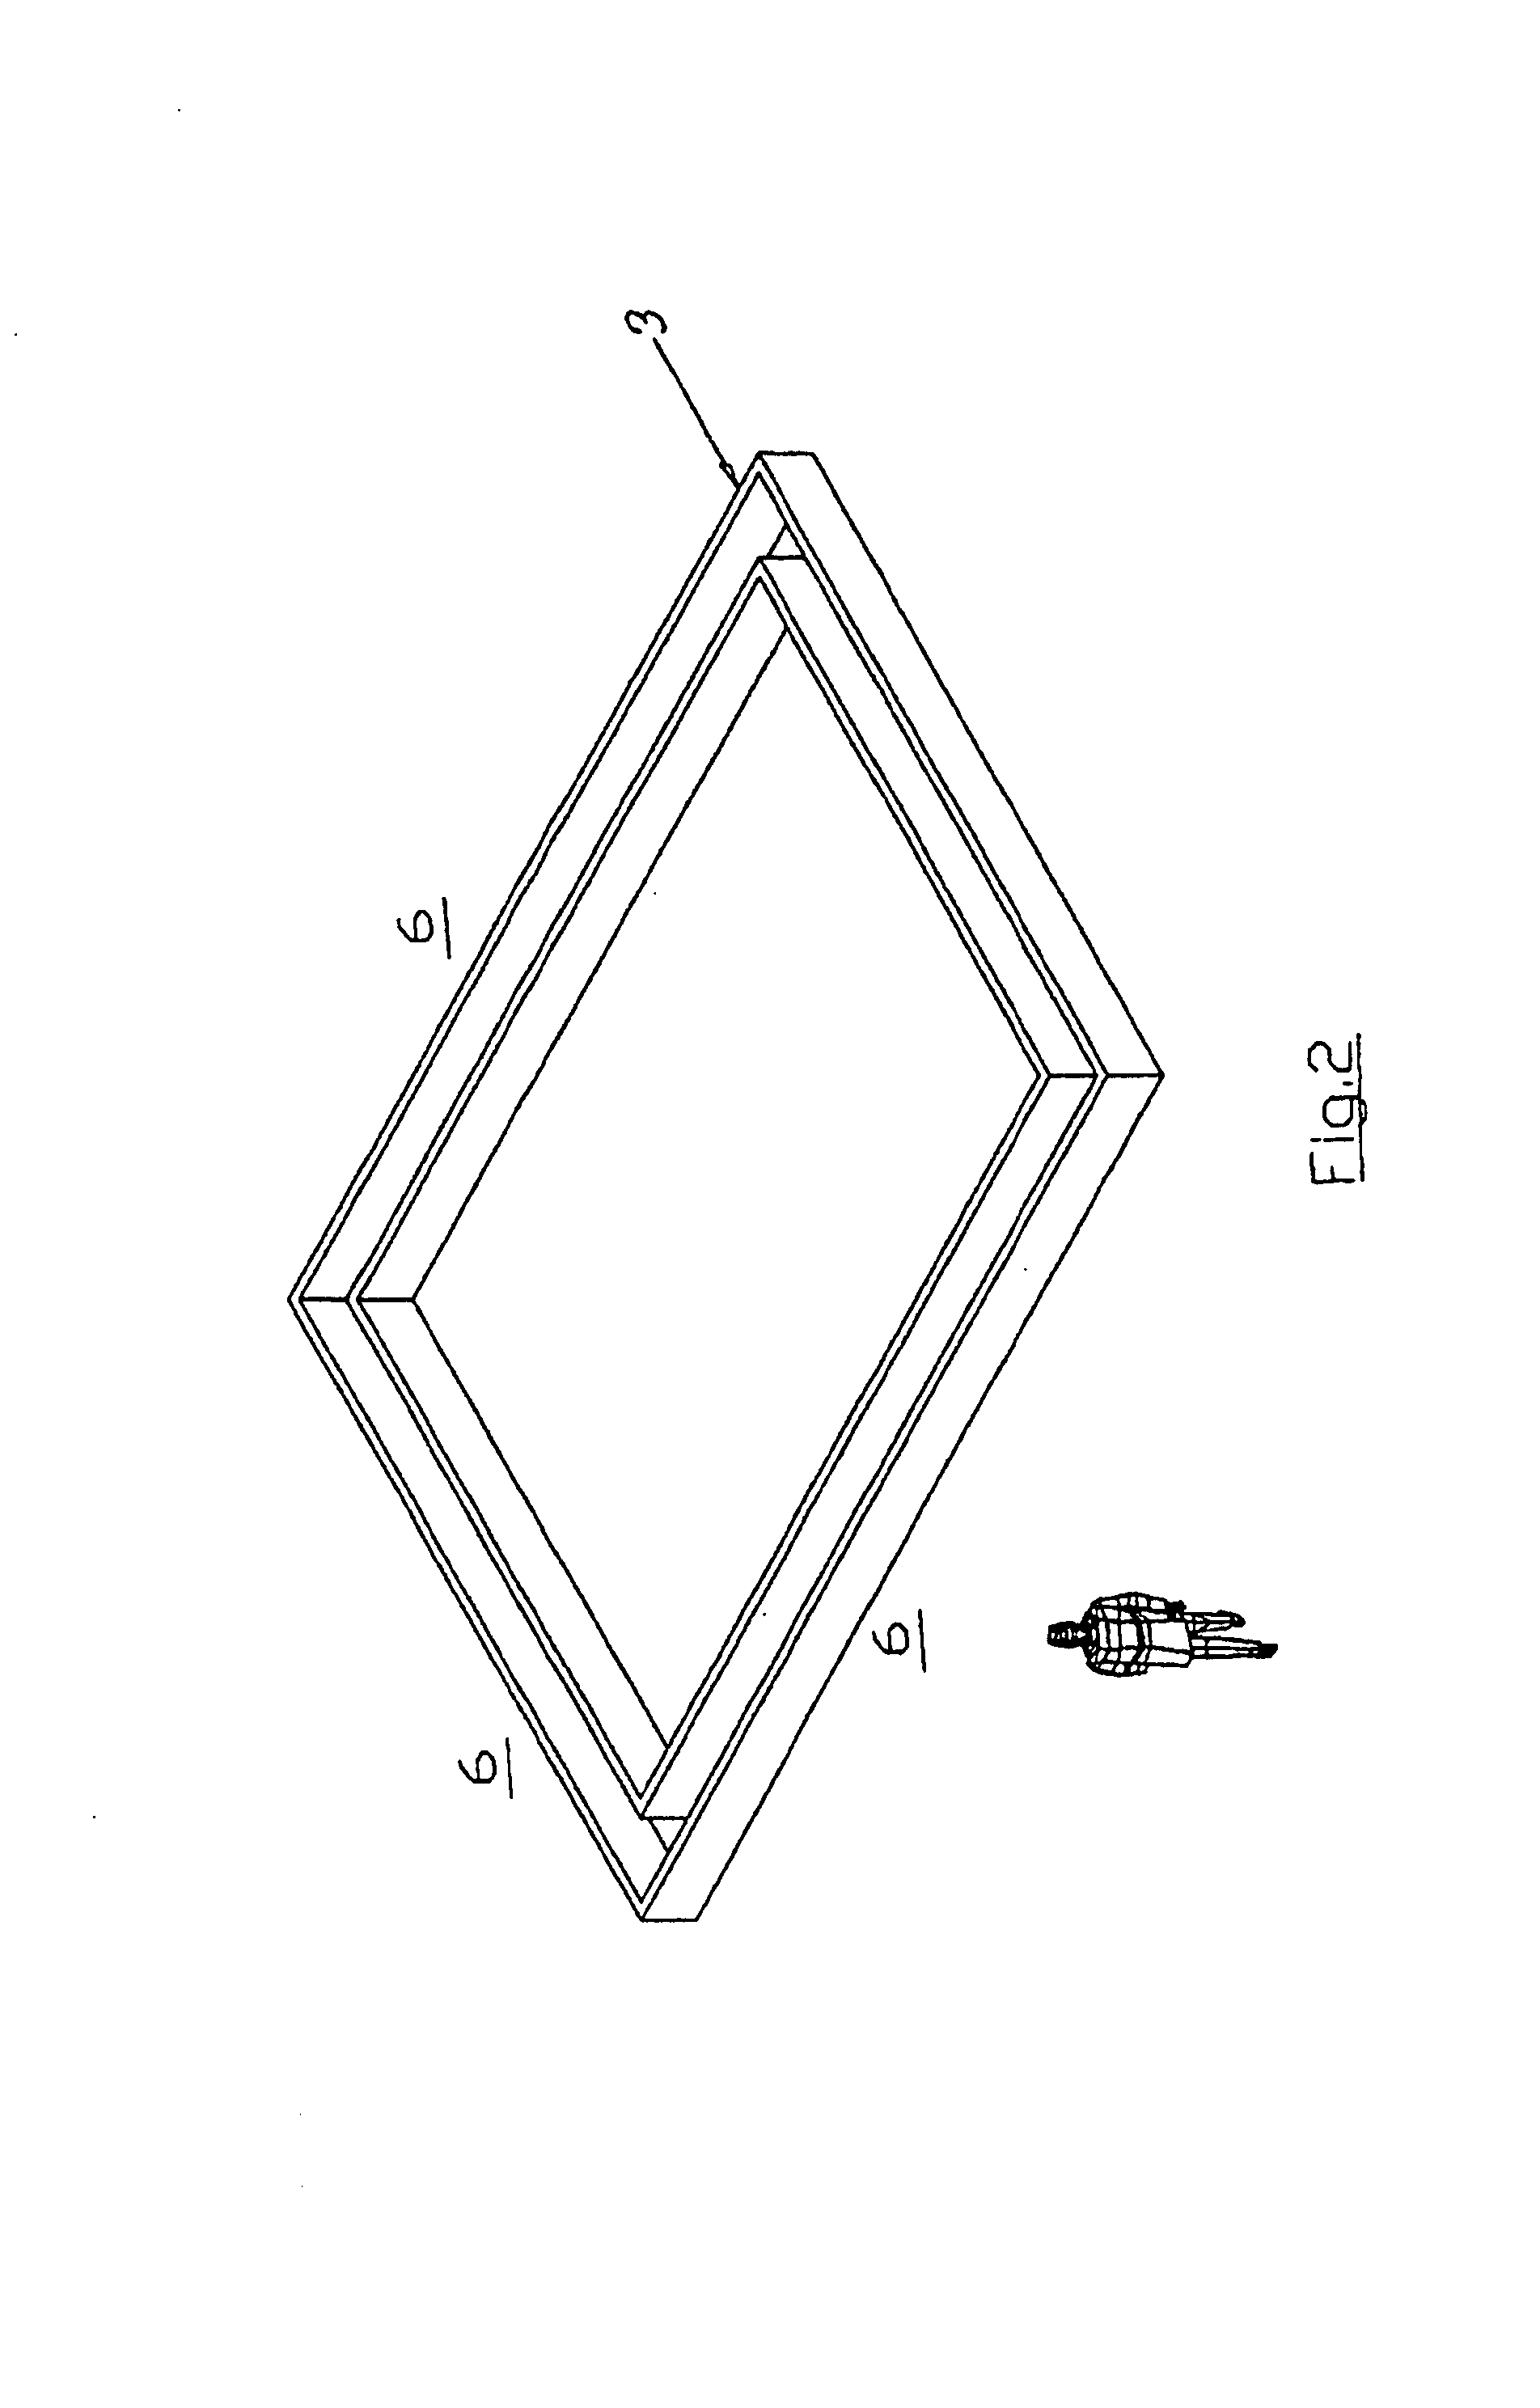 Method of manufacturing and analyzing a composite building